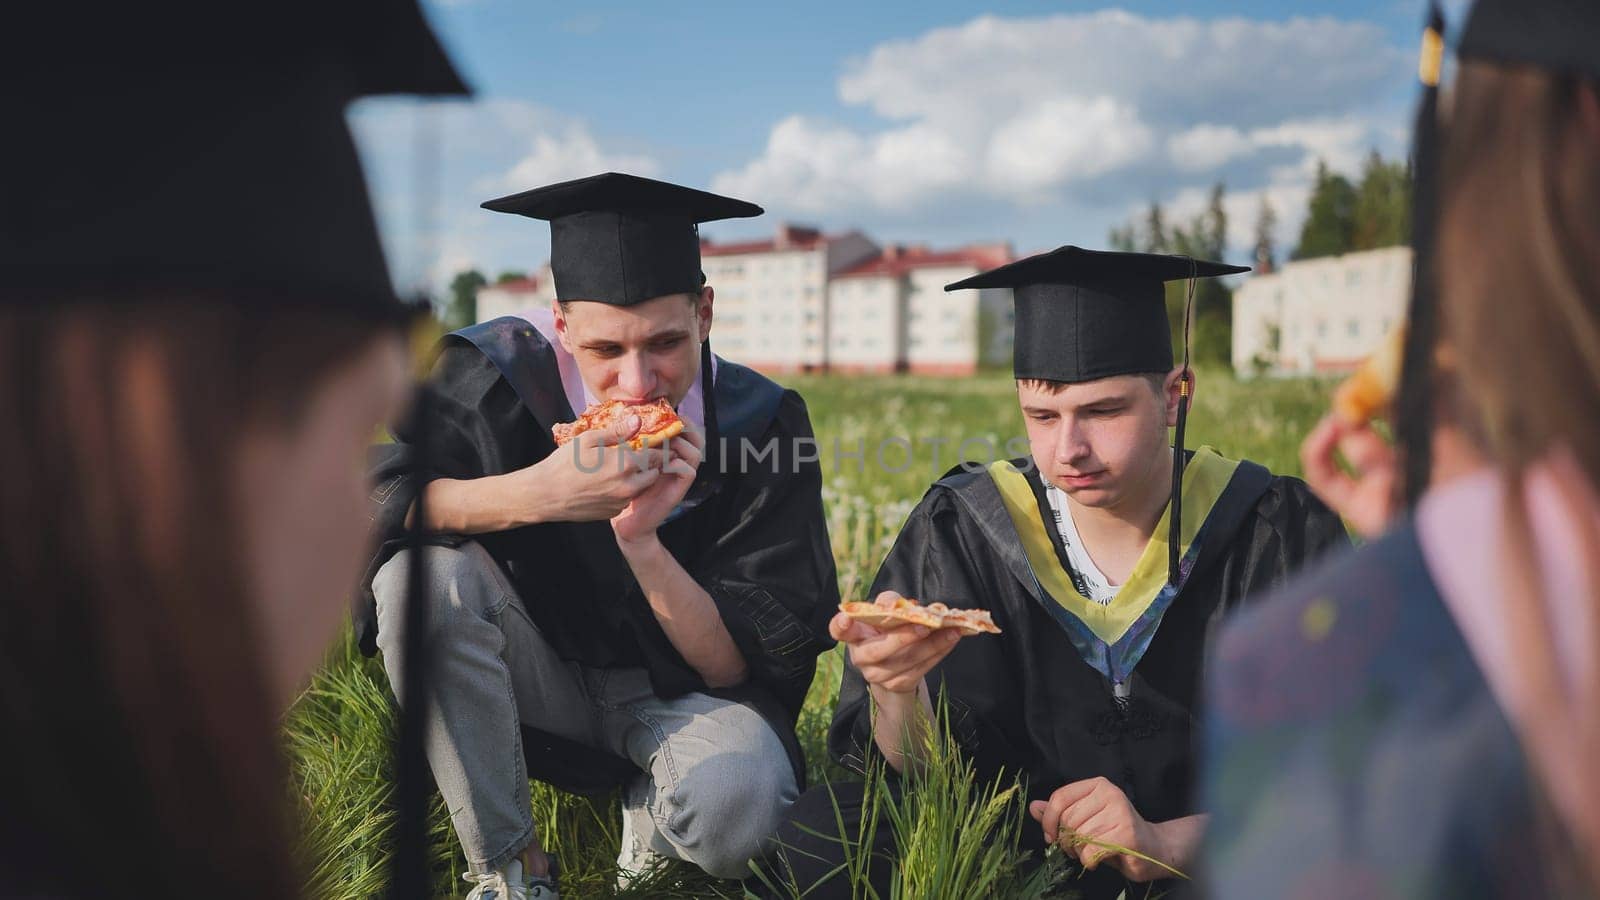 Graduates in black suits eating pizza in a city meadow